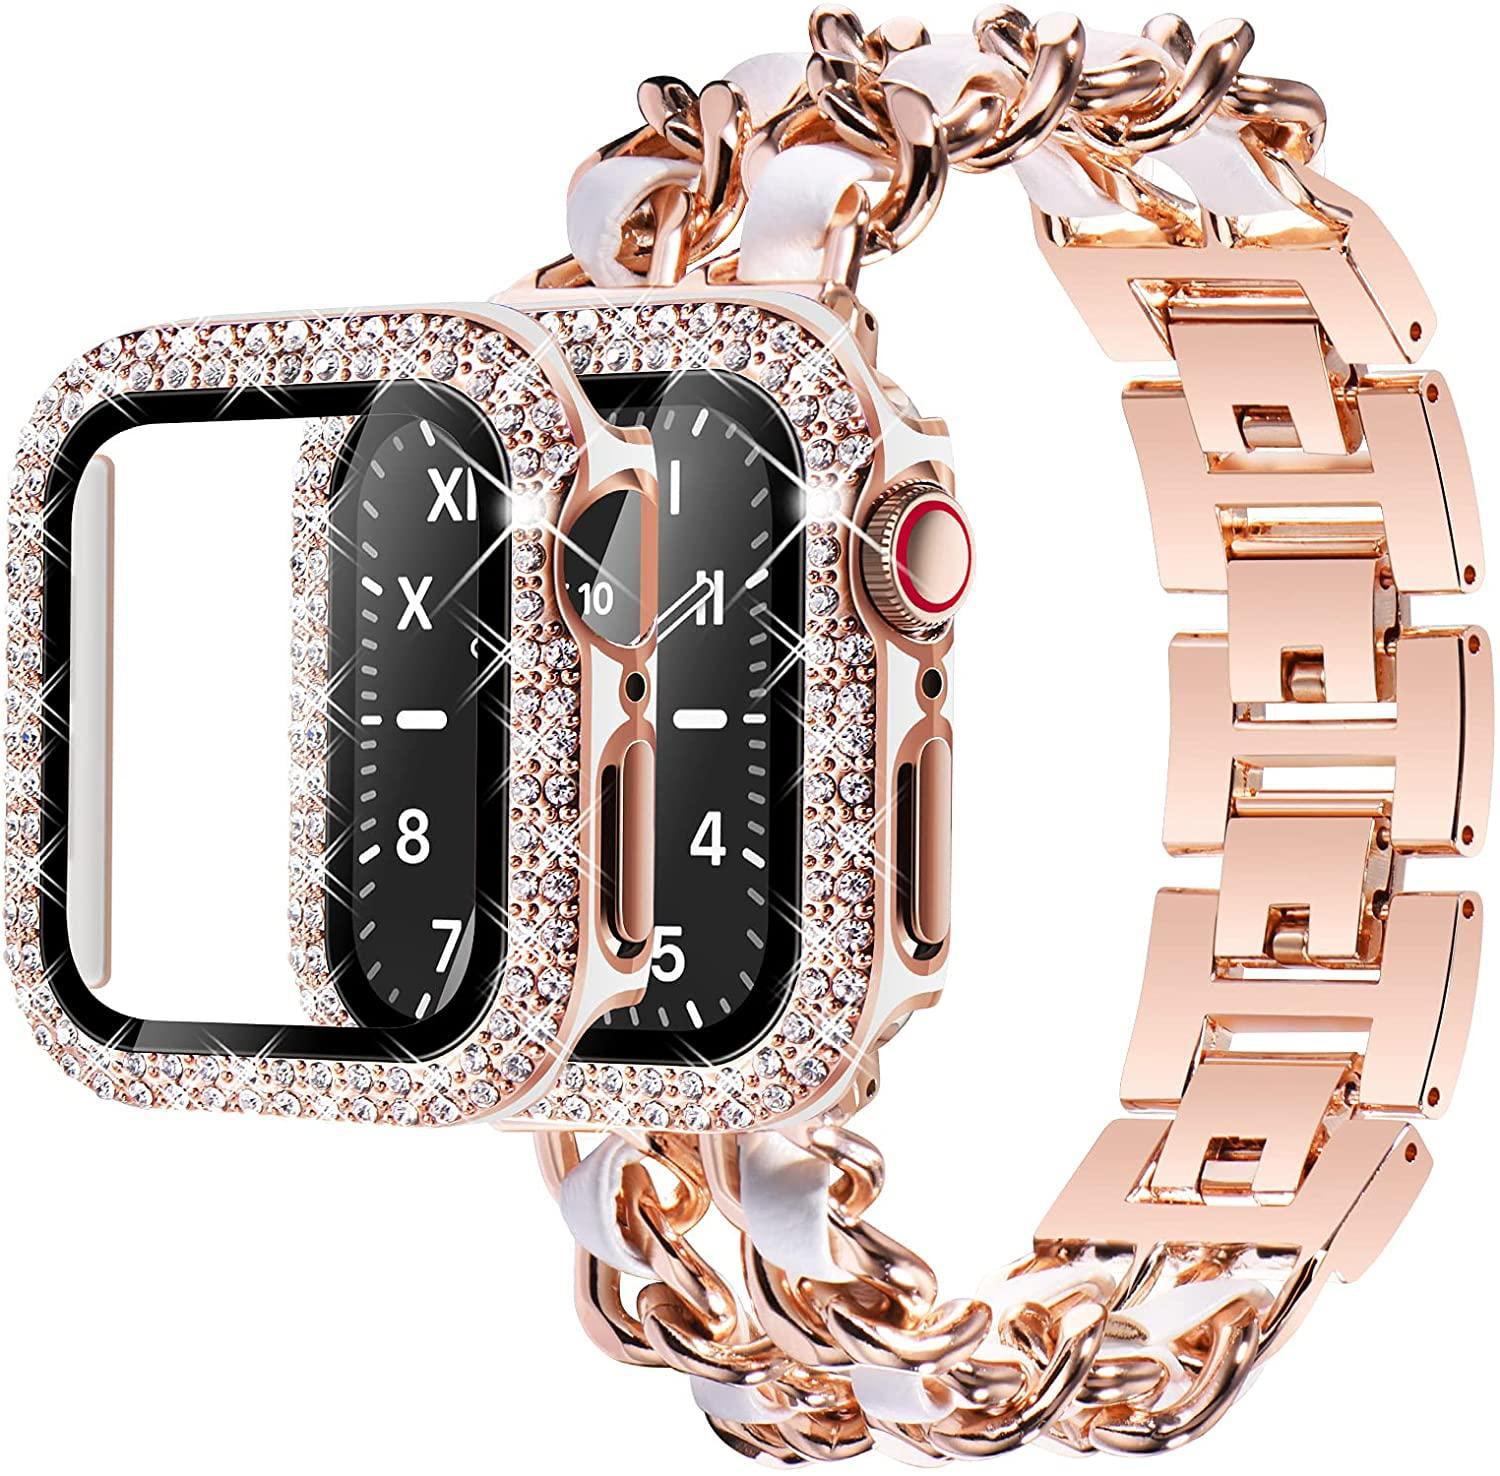 Cover 42mm and YuiYuKa 41mm Band Case 7 Chain 8 Apple with Metal Steel Bling Strap for iWatch Series Interwoven 45mm for Link Hard Leather Bumper 40mm 38mm Stainless Metal Watch 44mm